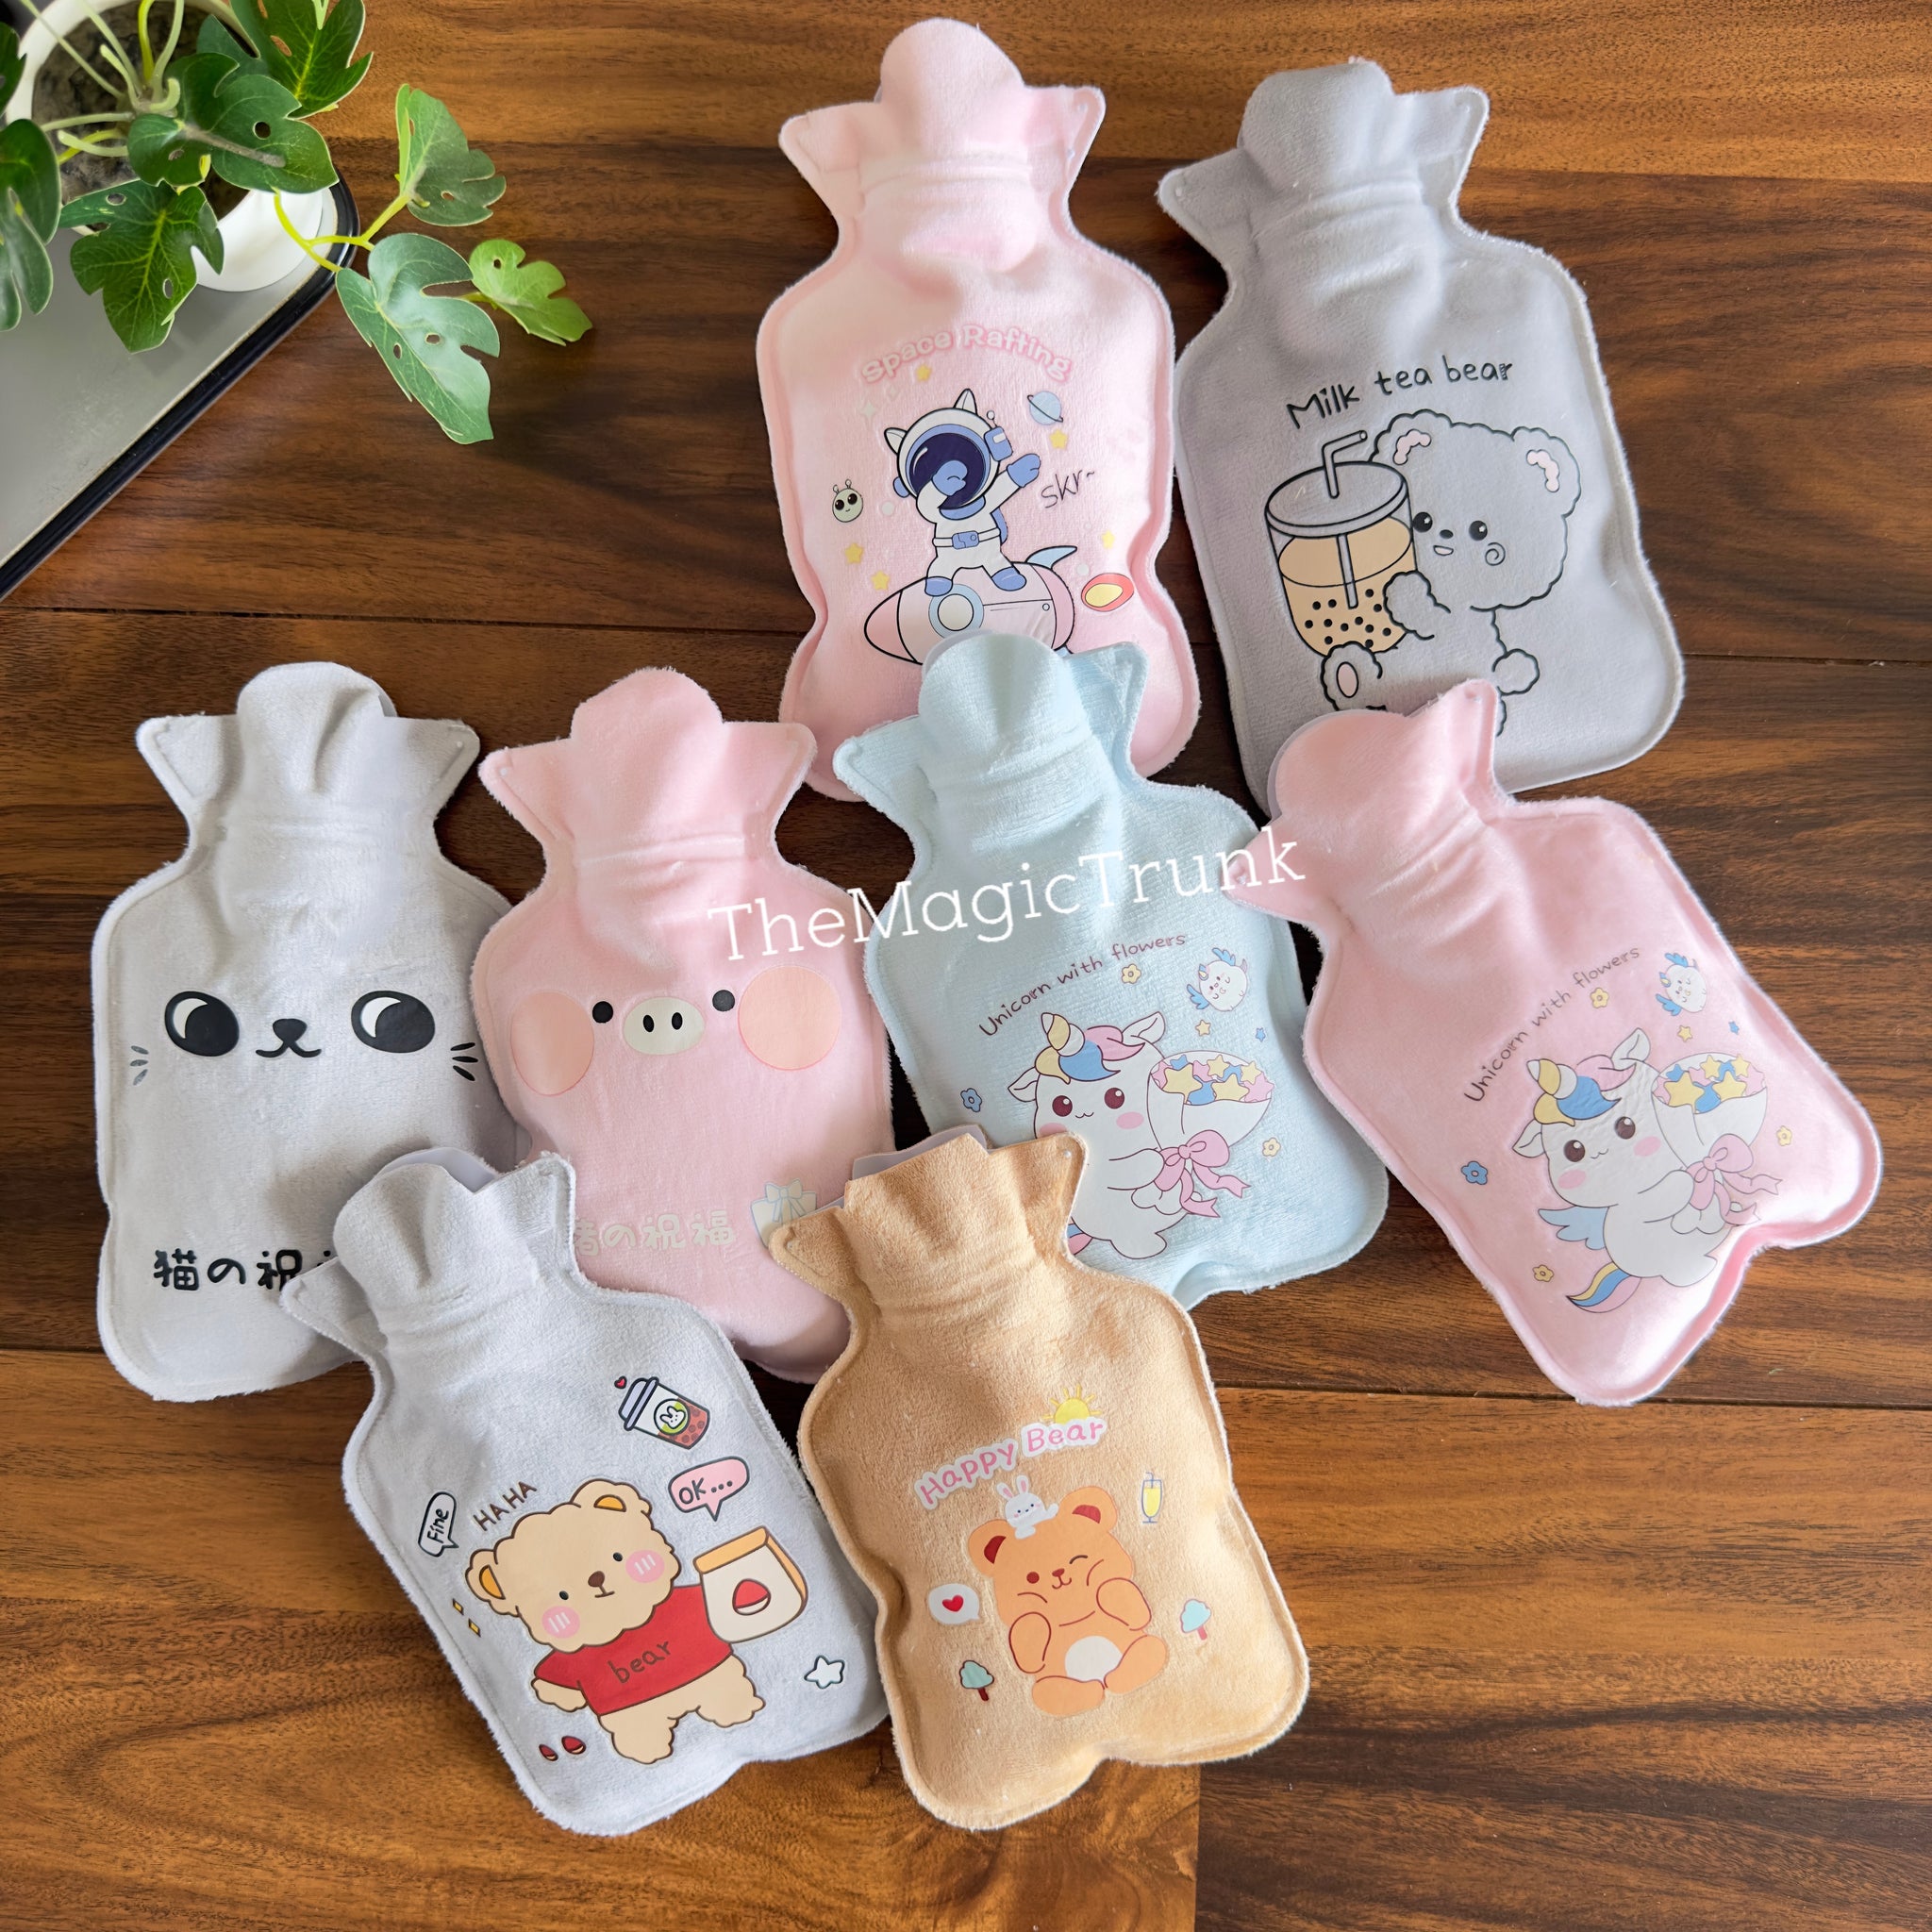 Small Hot Water Bottles < 1.5 Litres | Hotwaterbottleshop.co.uk